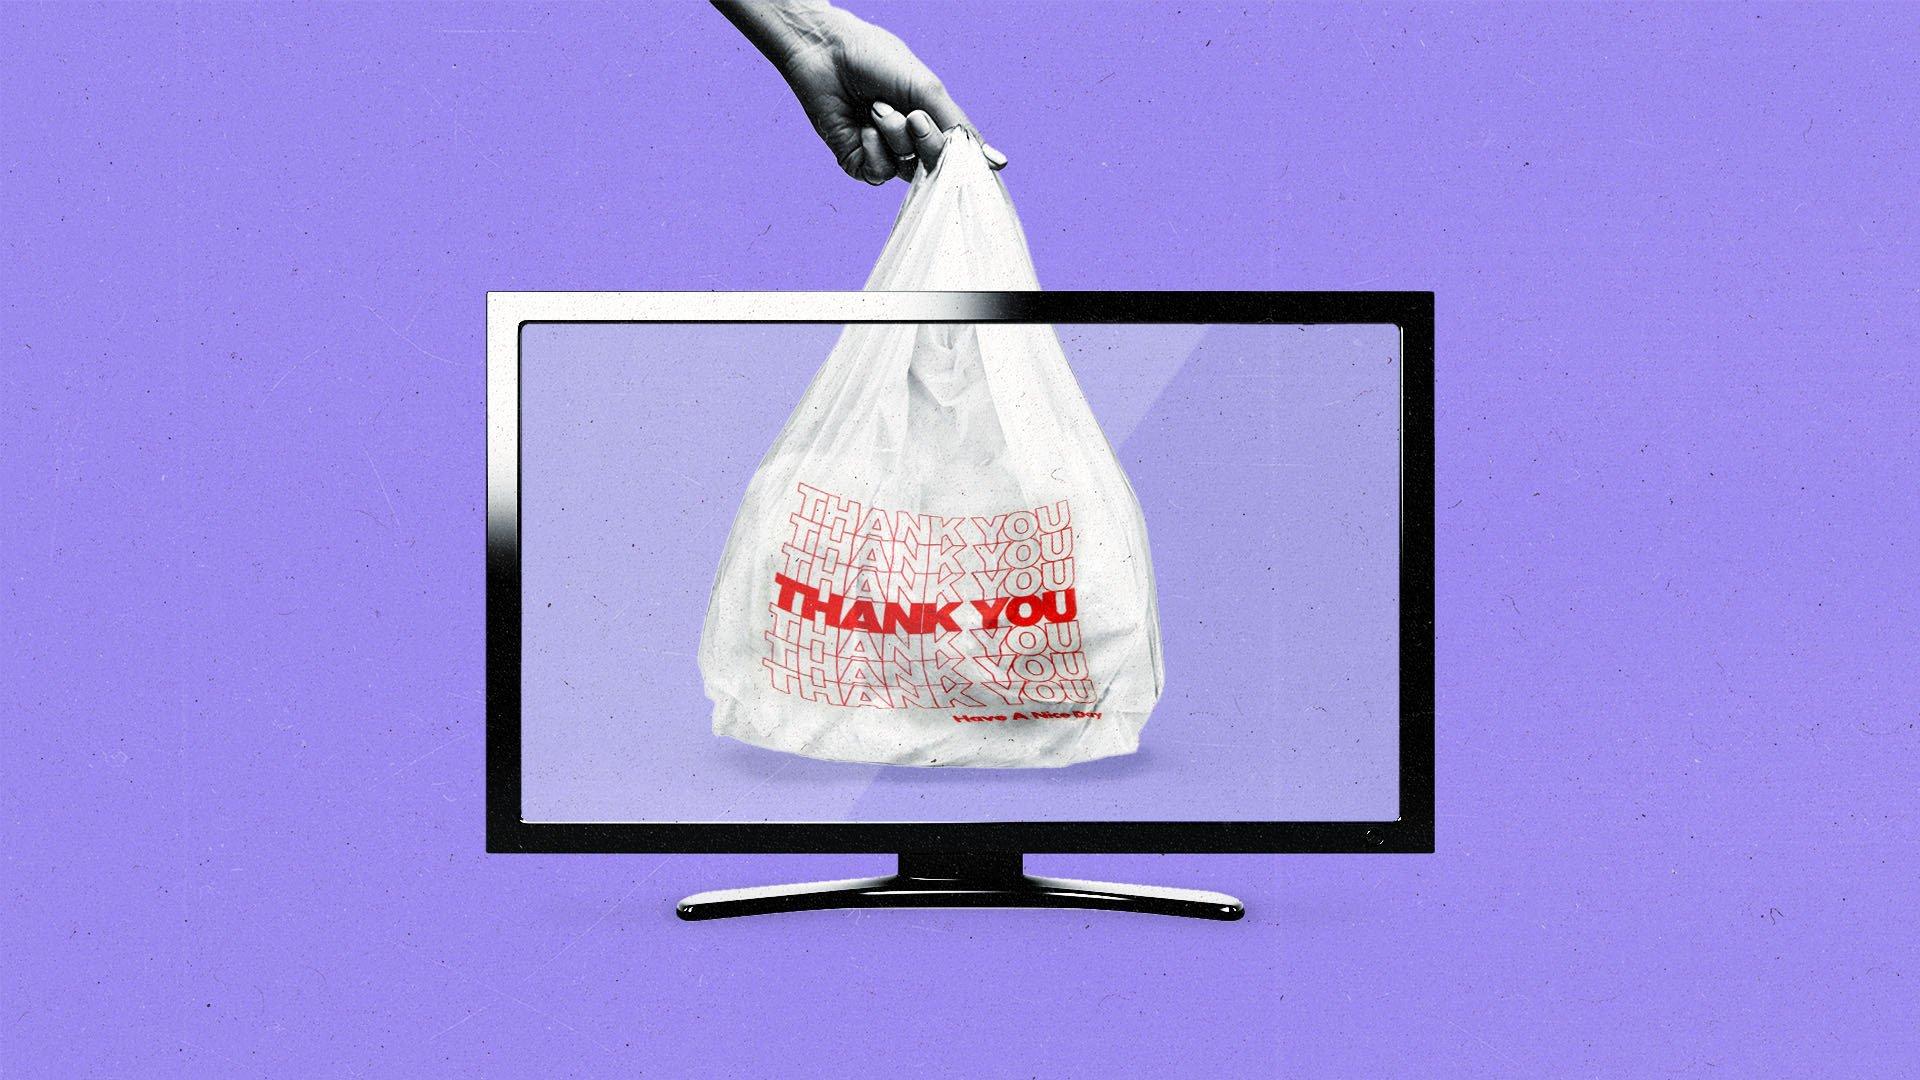 A hand holding a "thank you" plastic bag extending past the top of a television frame